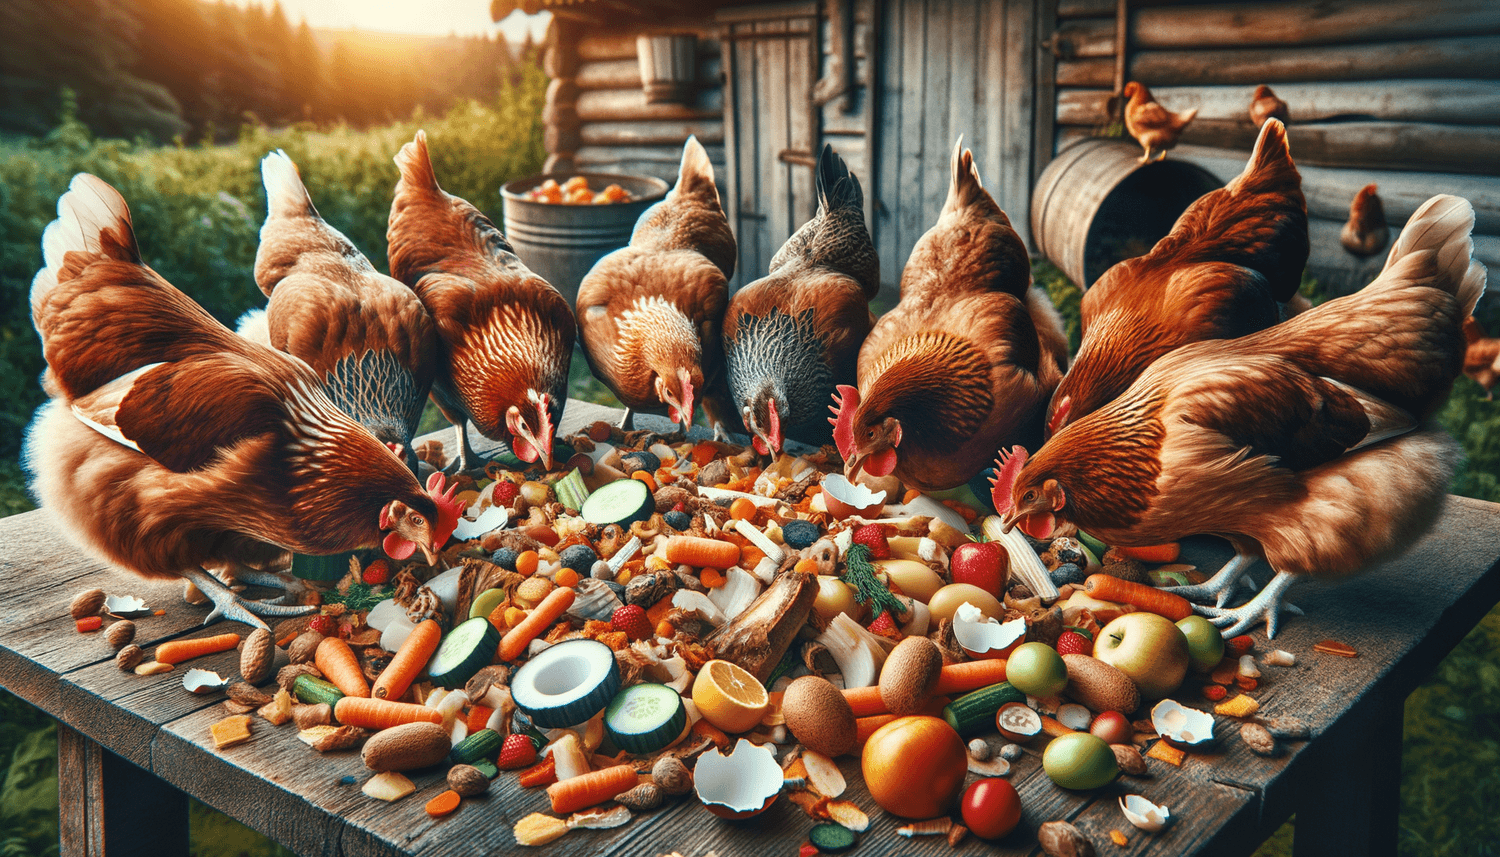 Can Chickens Eat Table Scraps?